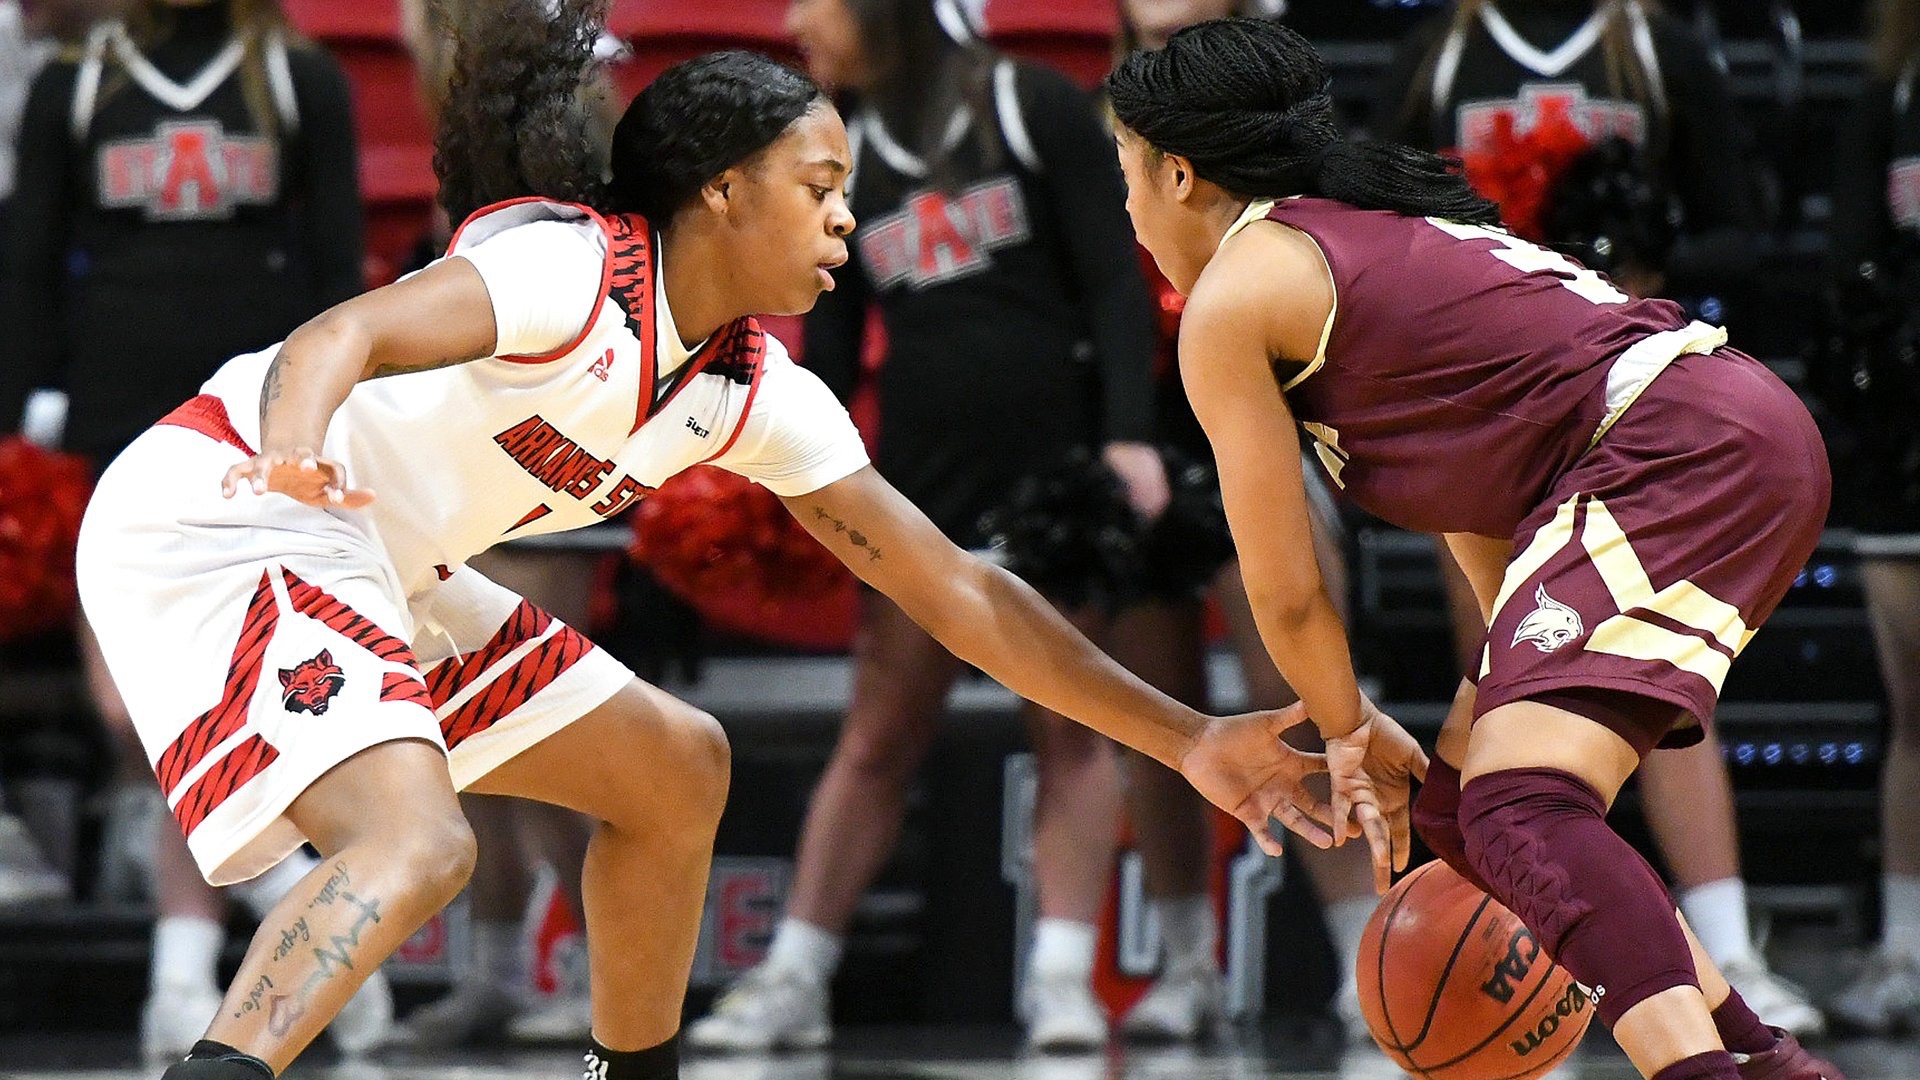 A Texas State player keeps the ball from an Arkansas State player.